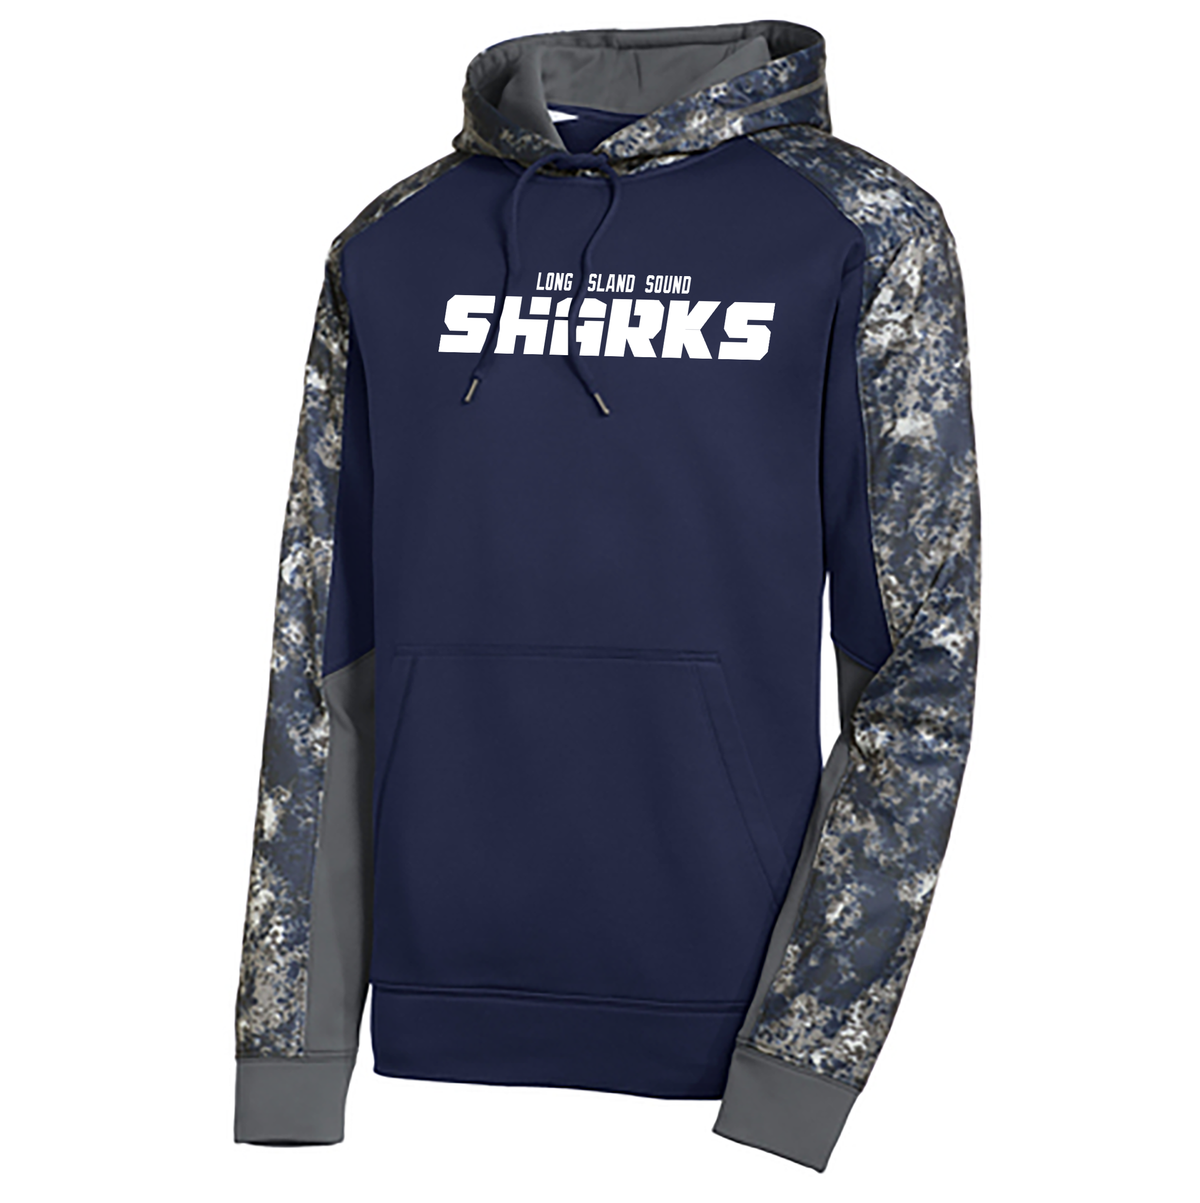 Long Island Sound Sharks Football Mineral Freeze Colorblock Hoodie